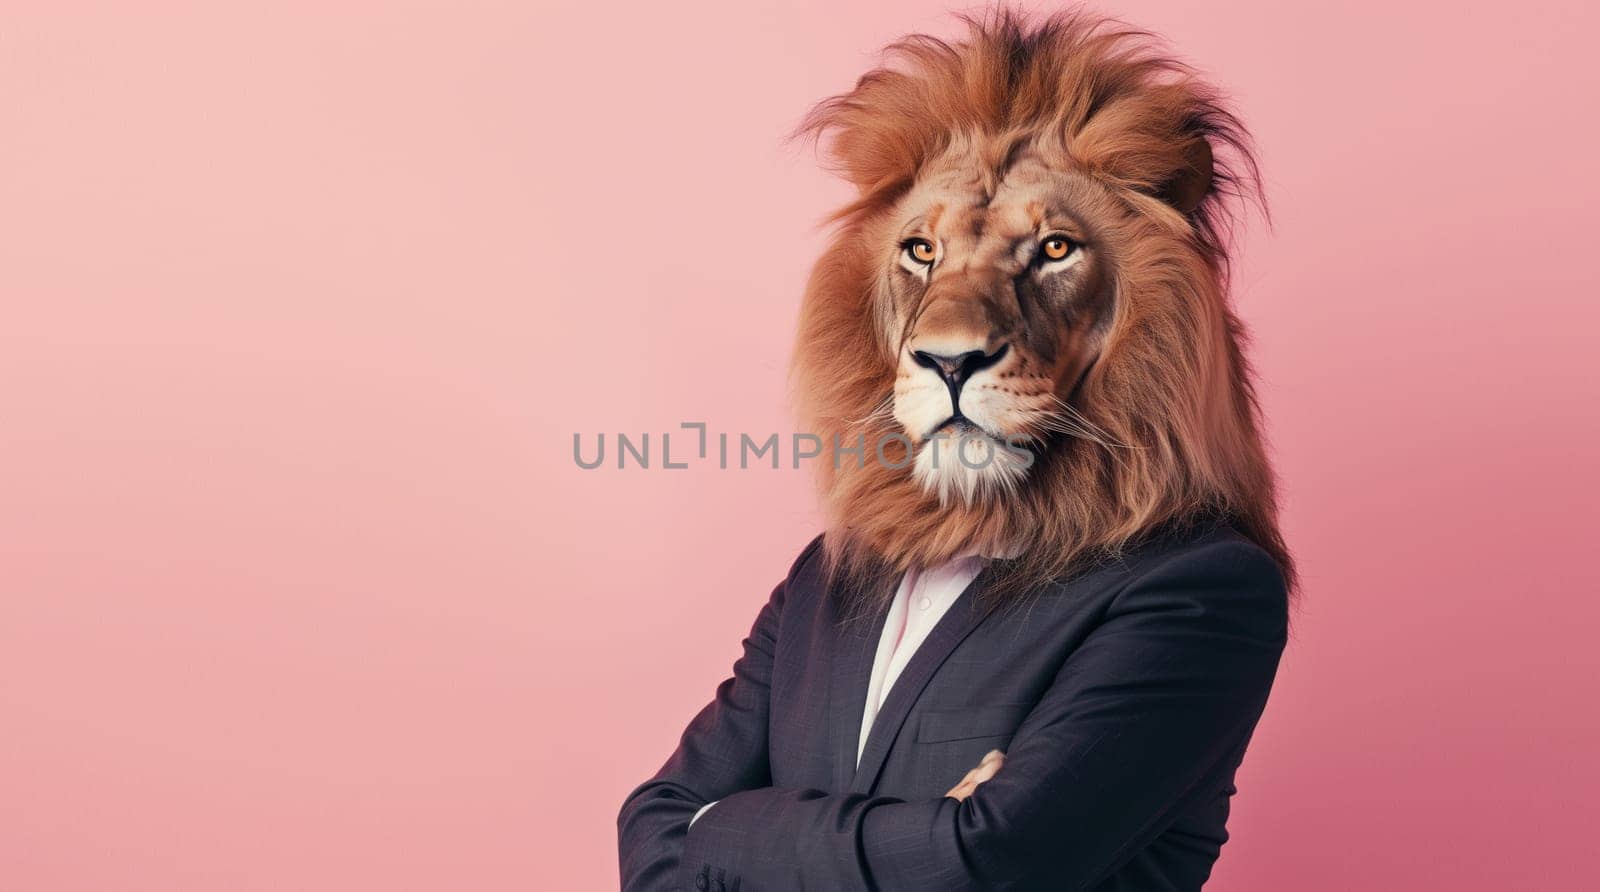 Confident stylish lion businessman in a suit on pink background, business, animal, creative concept by Rohappy